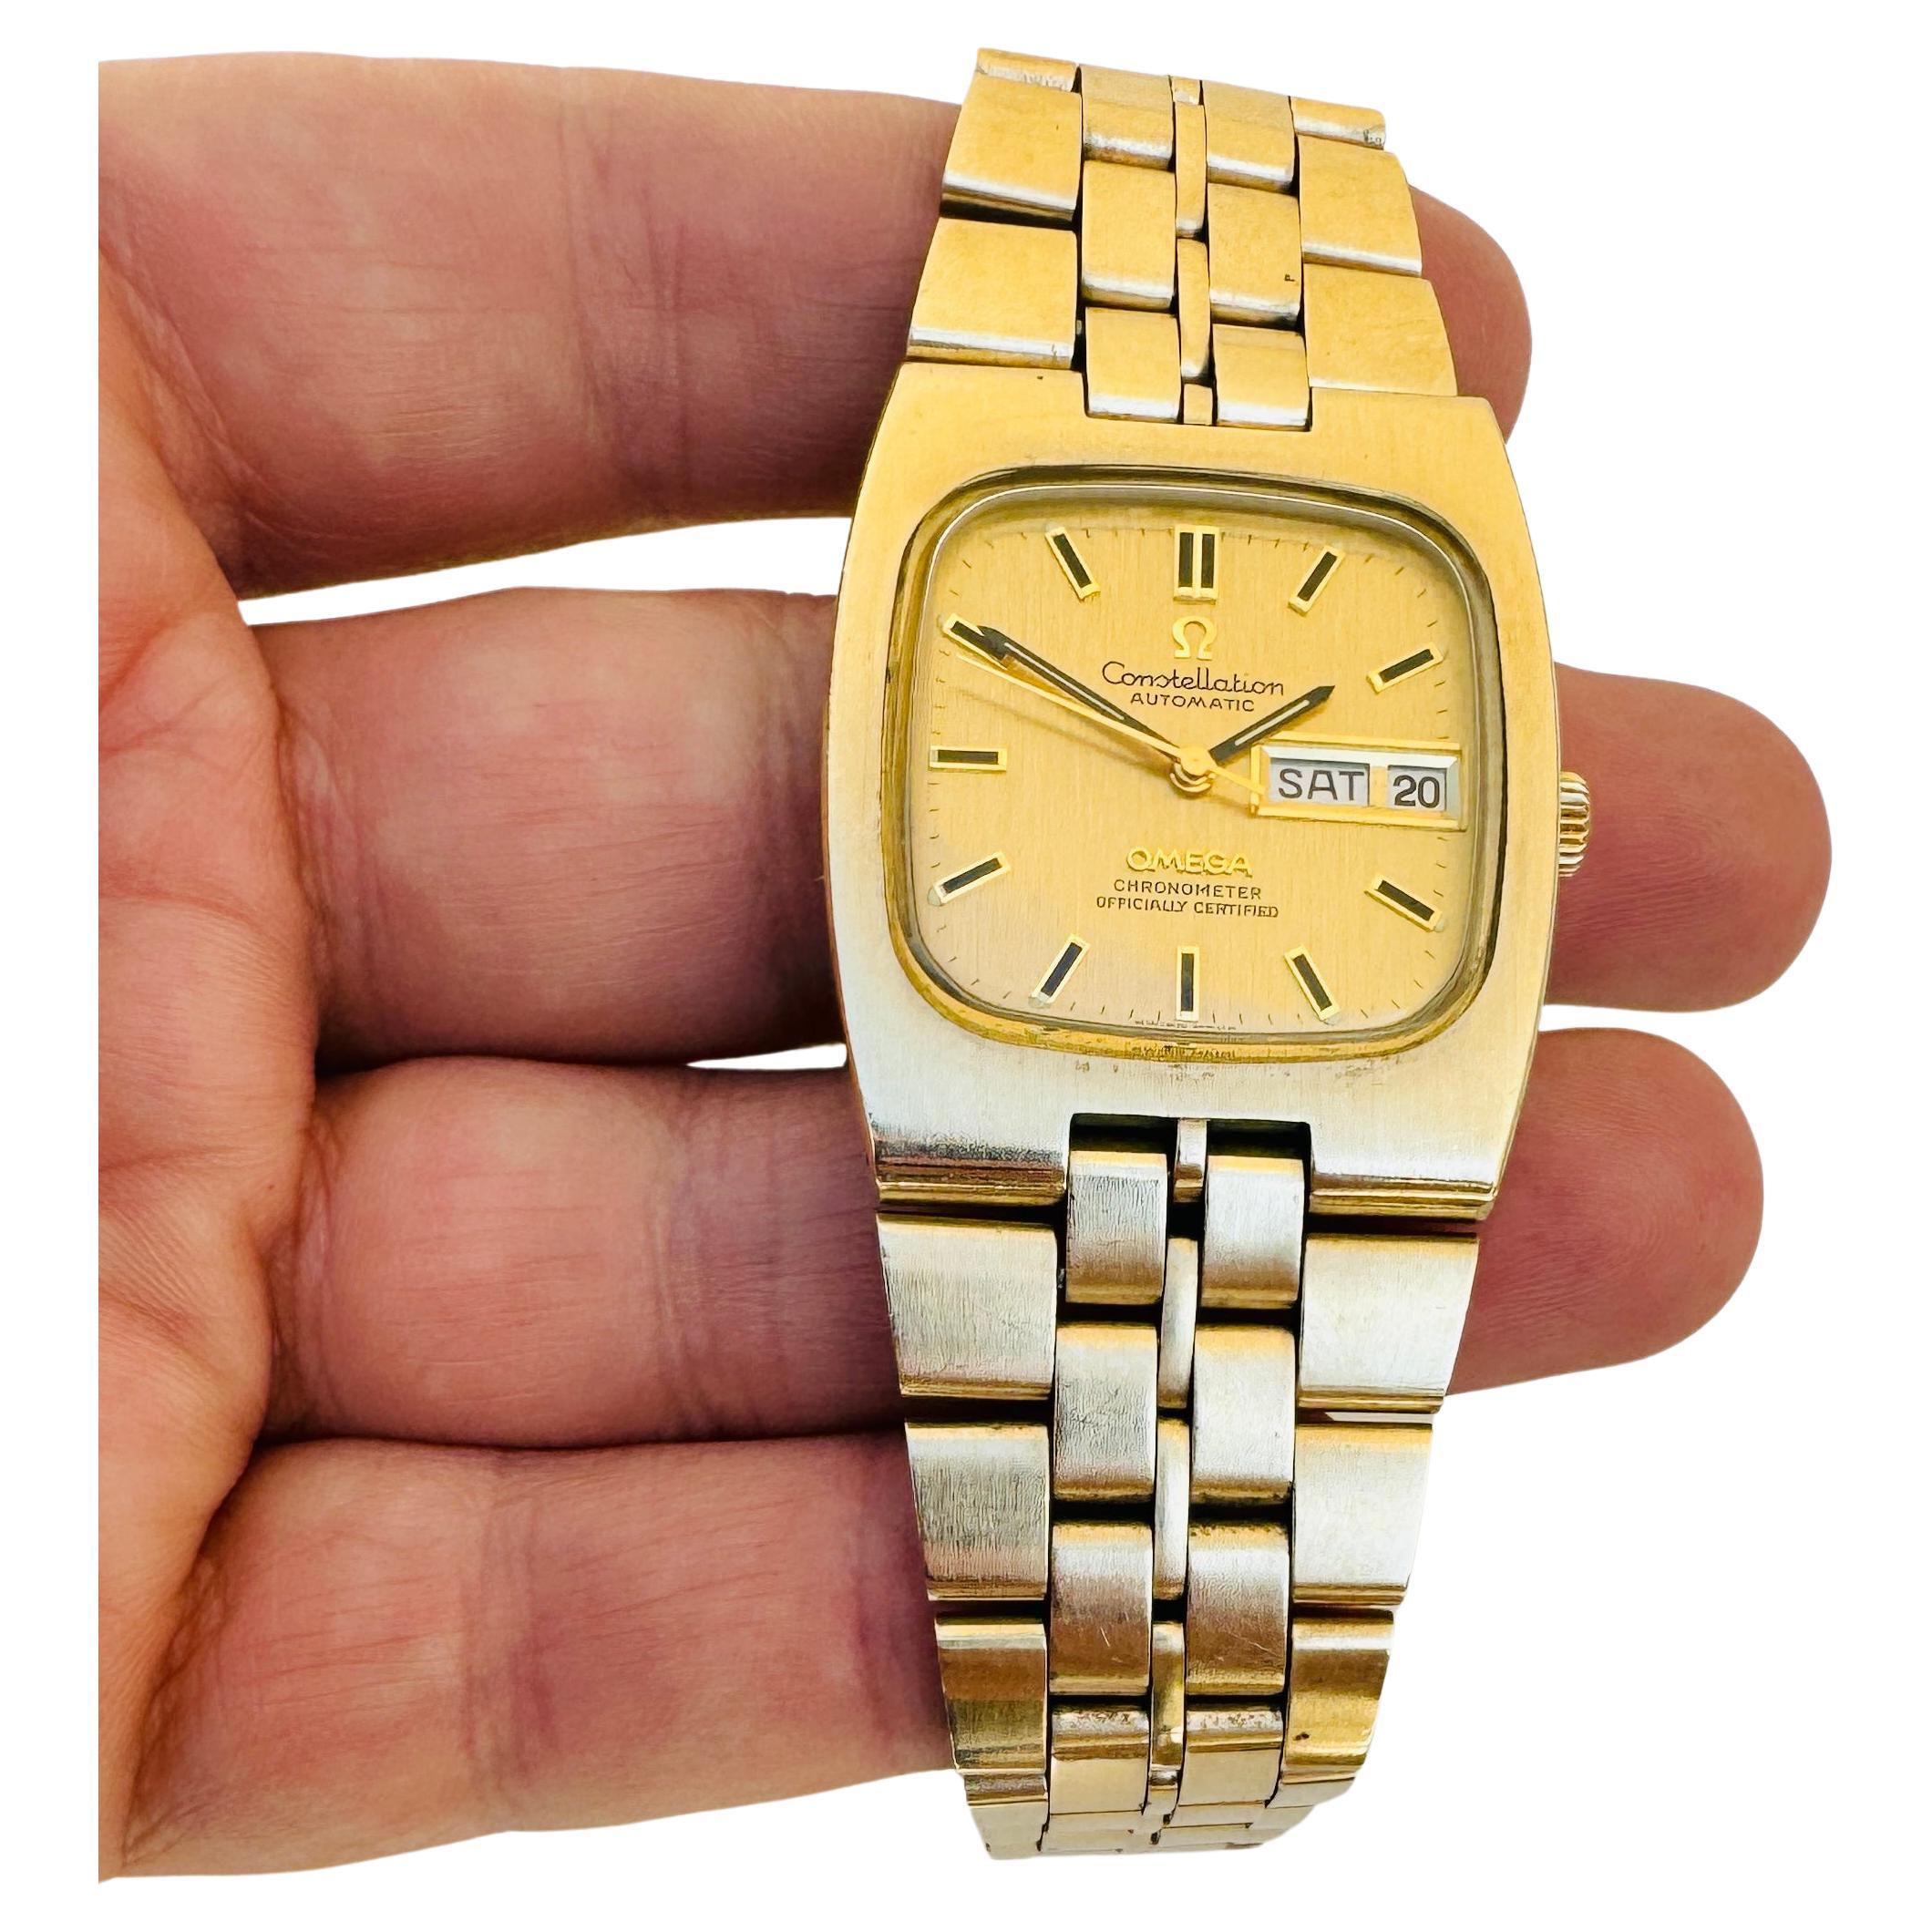  Omega Constellation Chronometer Gold Plated 70s Automatic Watch  Boxed